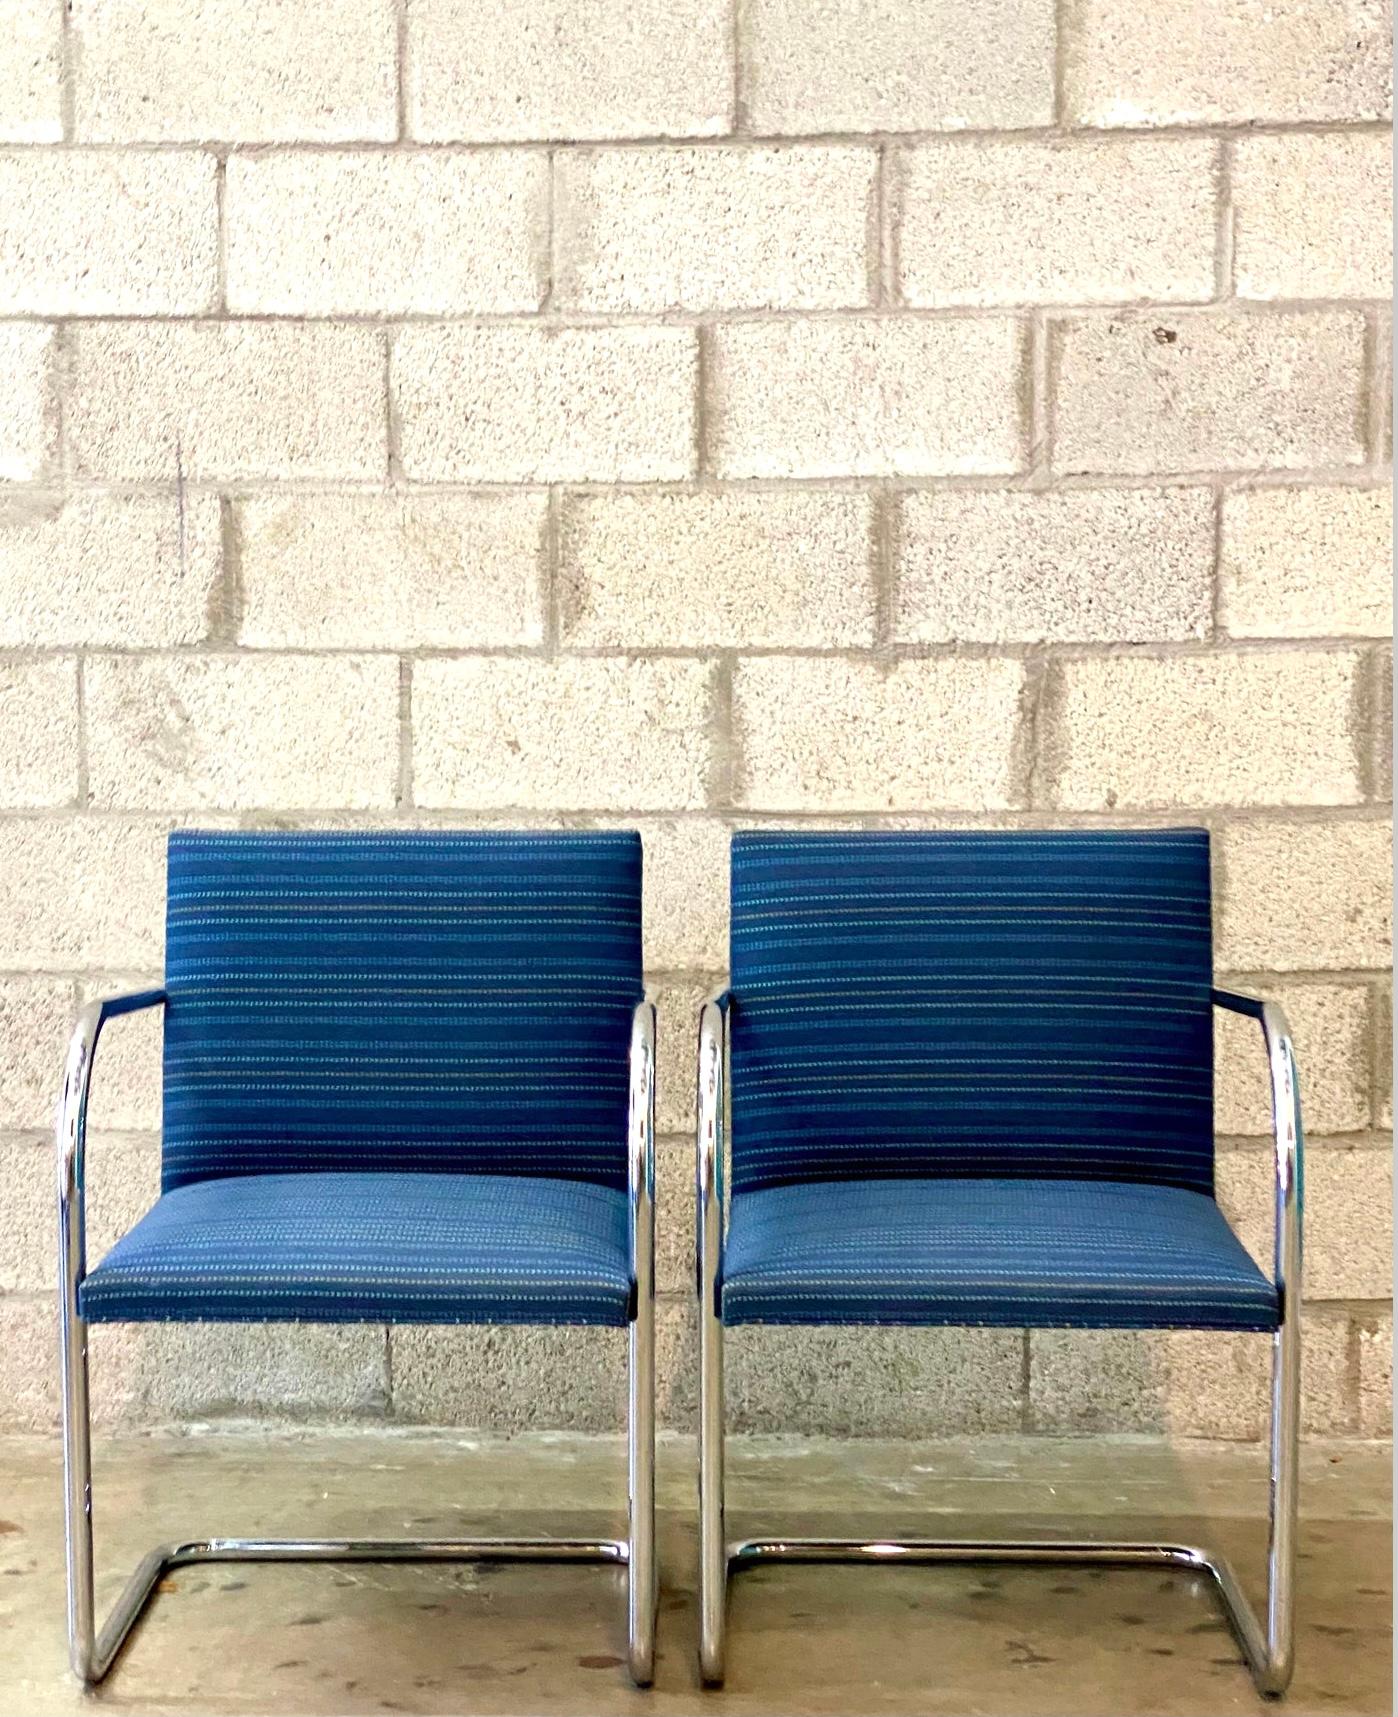 Late 20th Century Vintage Midcentury Knoll Tubular BRNO Chairs, a Pair For Sale